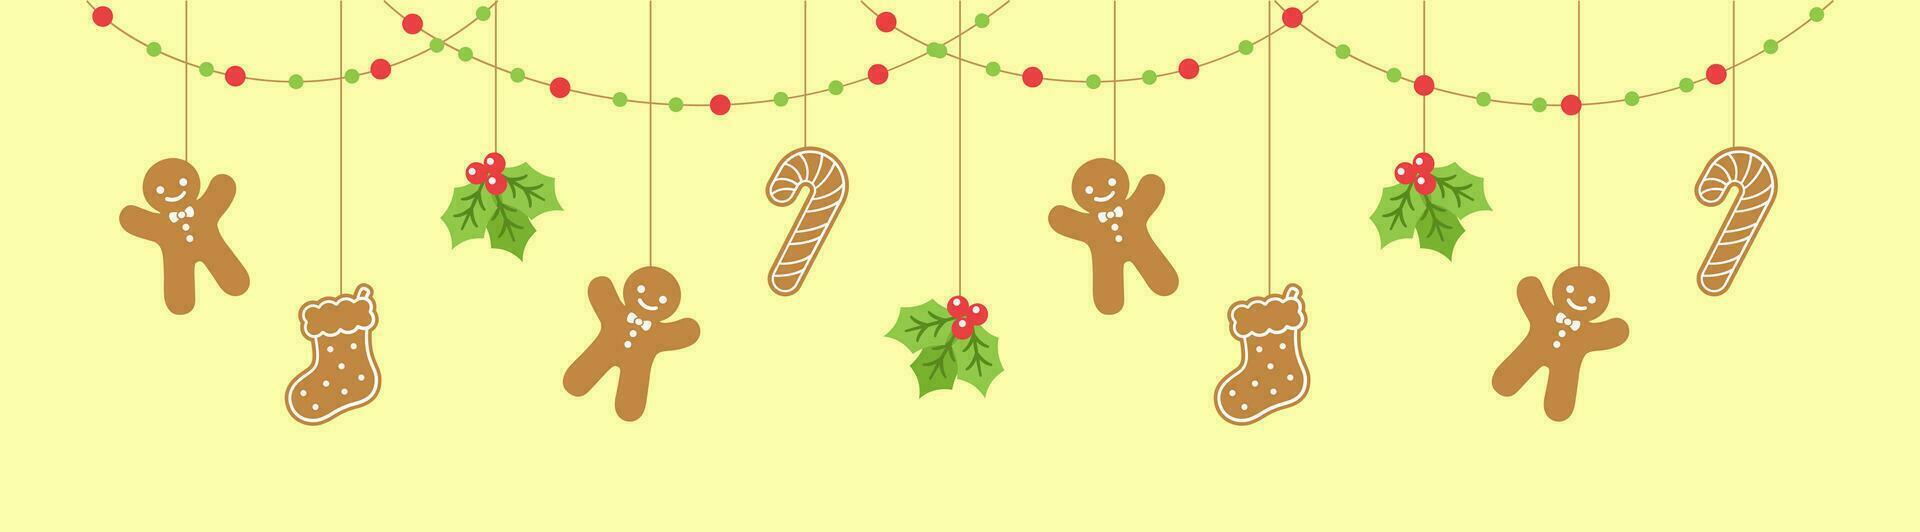 Merry Christmas Border Banner, Hanging Gingerbread Cookies and Mistletoe Garland. Winter Holiday Season Header Decoration. Biscuits in Festive Shapes Template. Vector illustration.